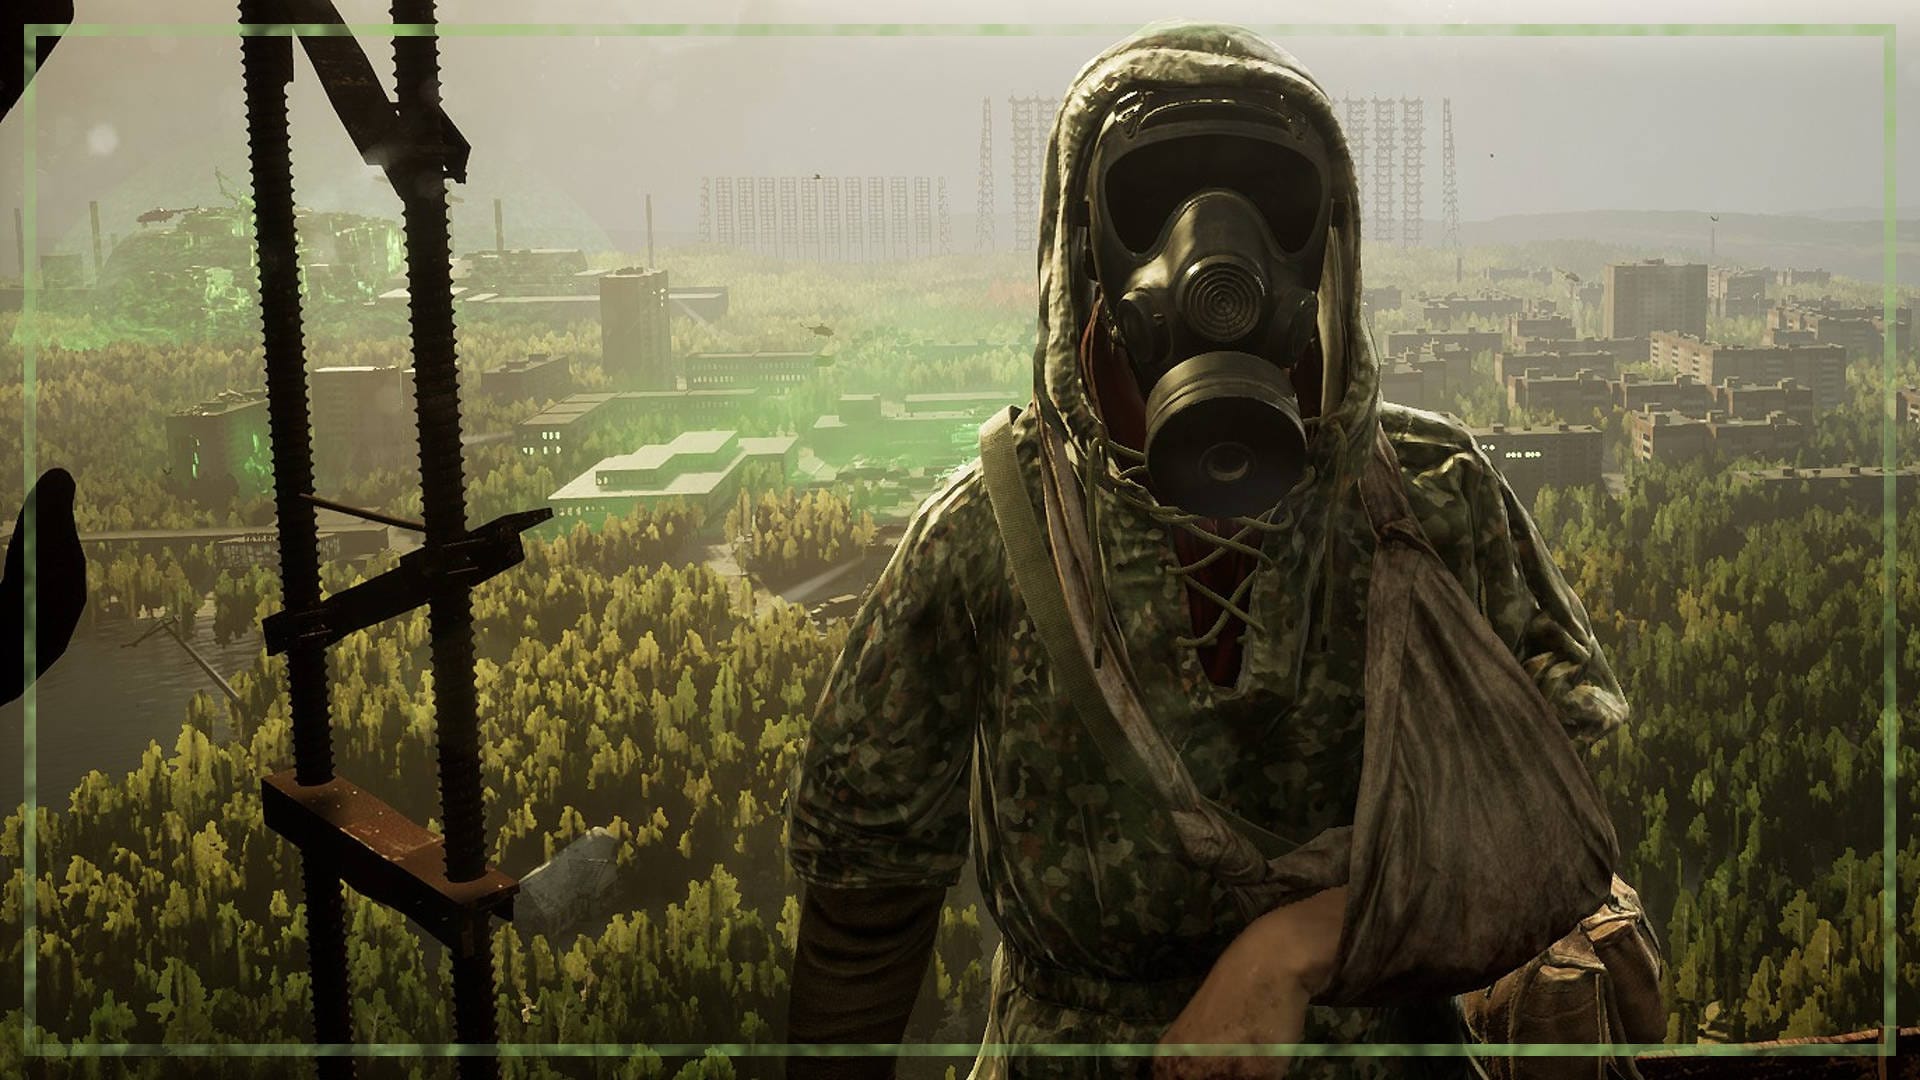 Chernobylite Stalker Metro 2033 players cover